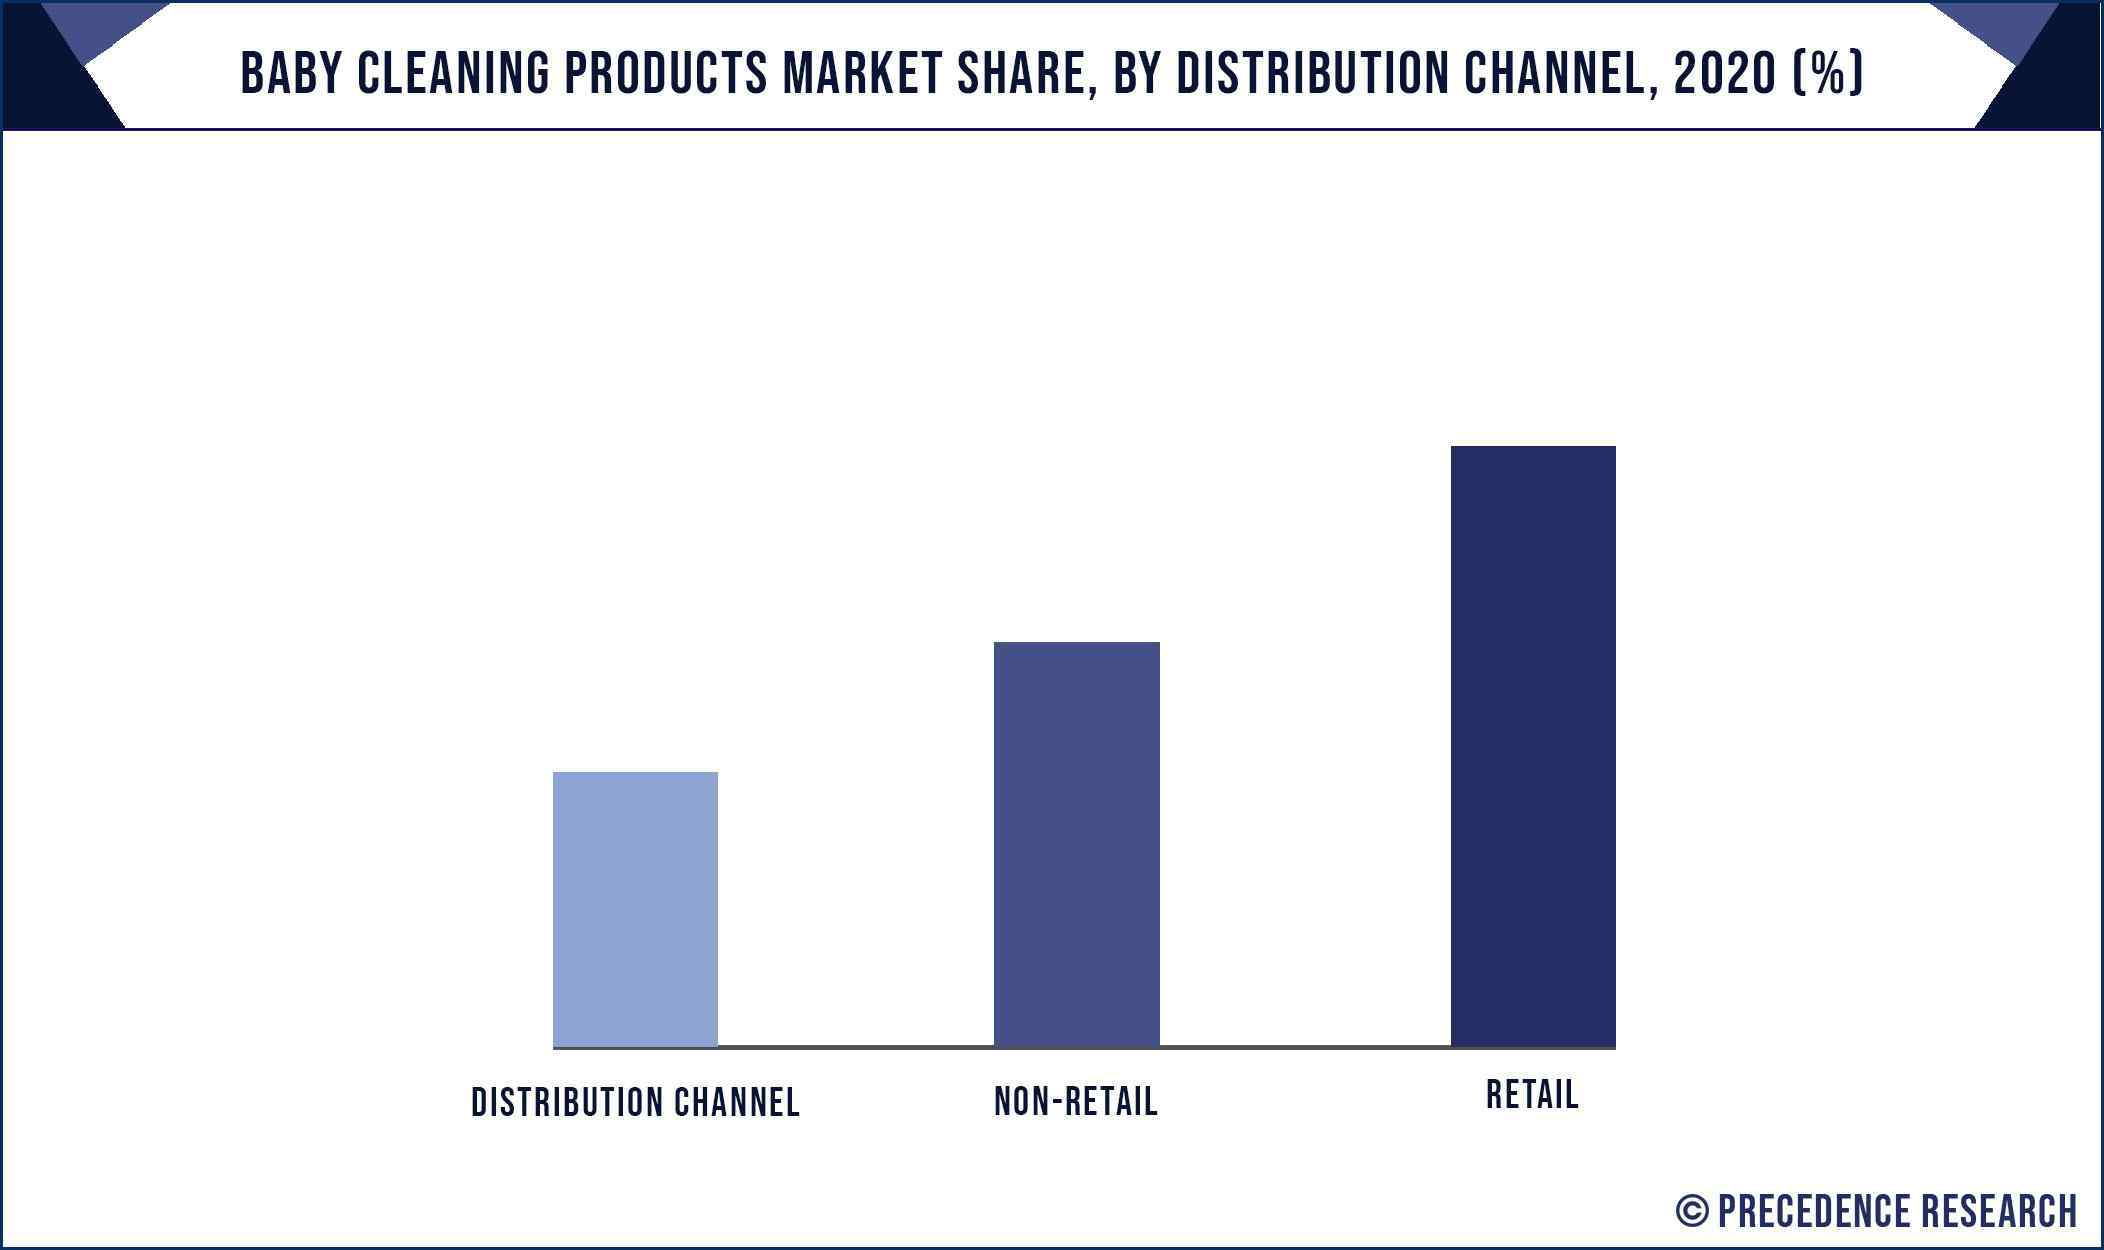 Baby Cleaning Products Market Share, By Distribution Channel, 2020 (%)